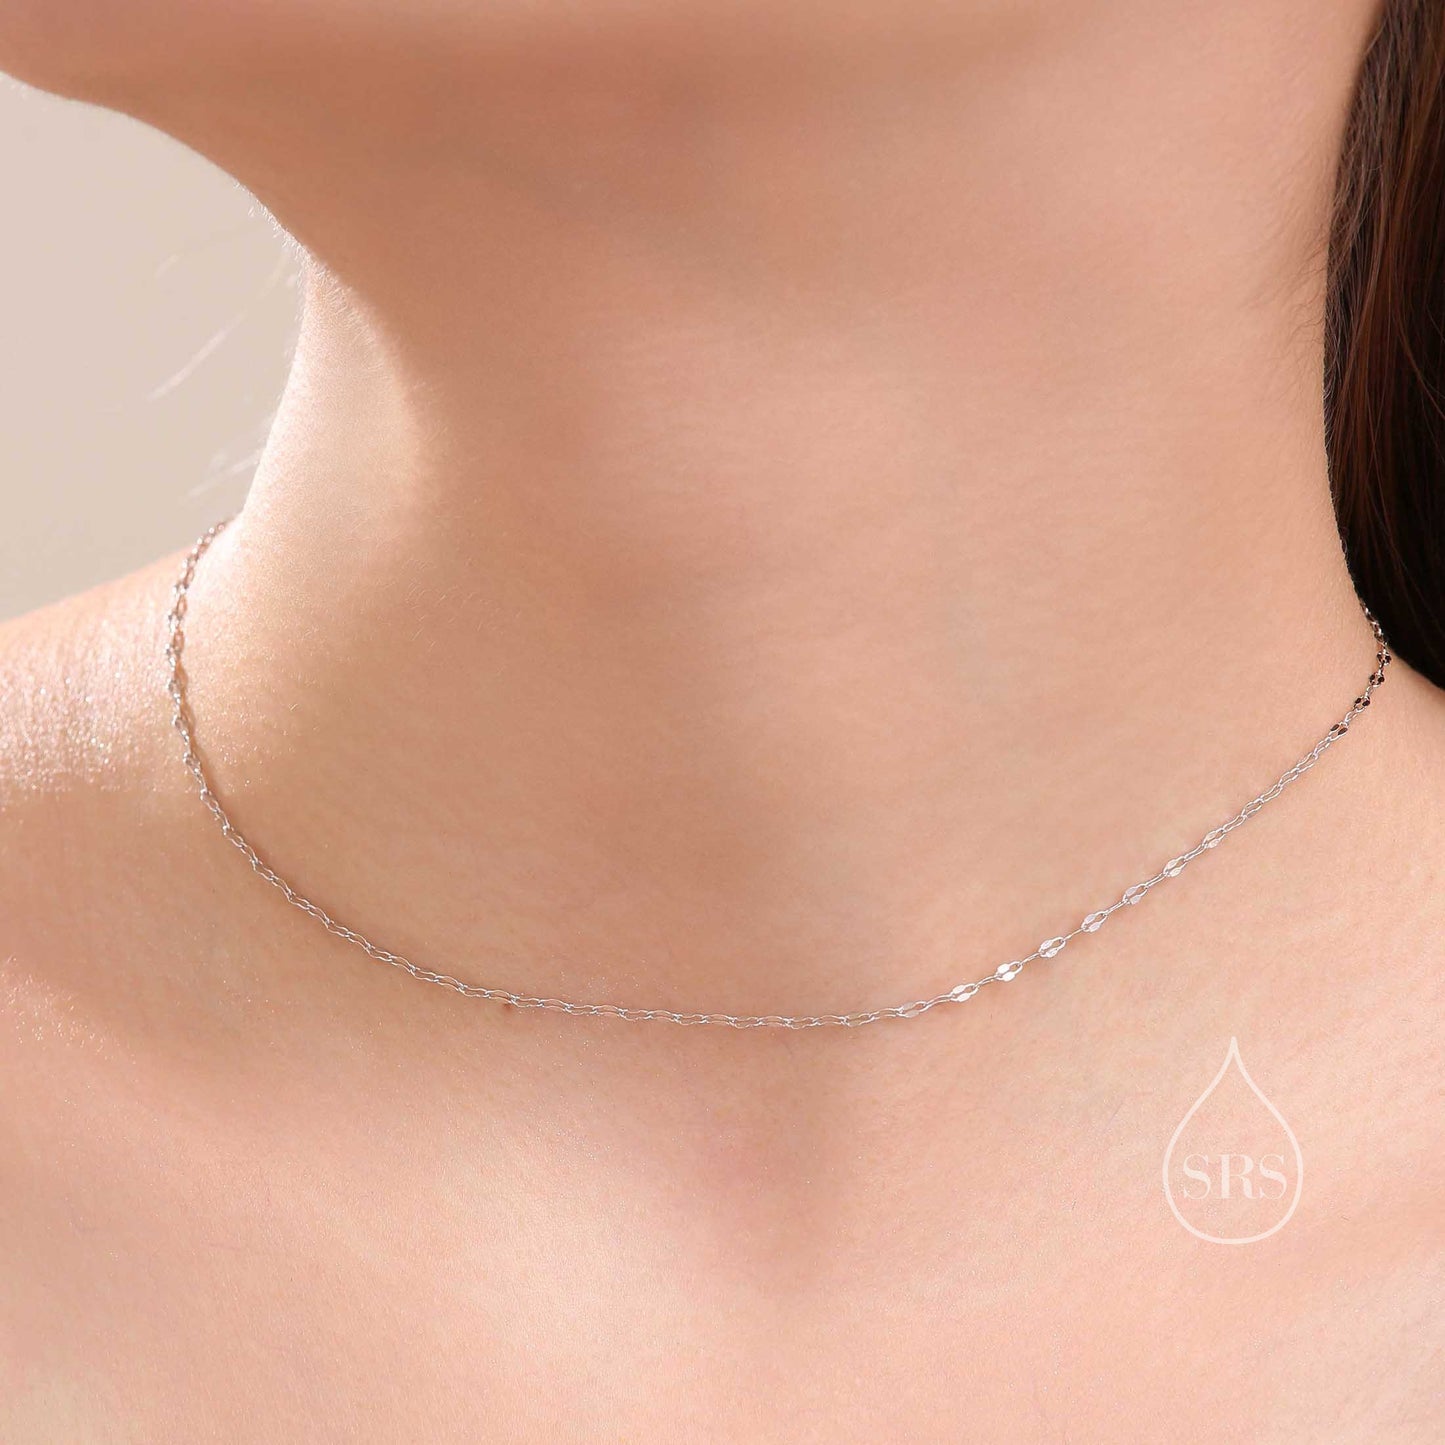 Minimalist Skinny Disk Chain Choker Necklace in Sterling Silver, Silver or Gold, Adjustable Length, Skinny and Delicate Collar Necklace